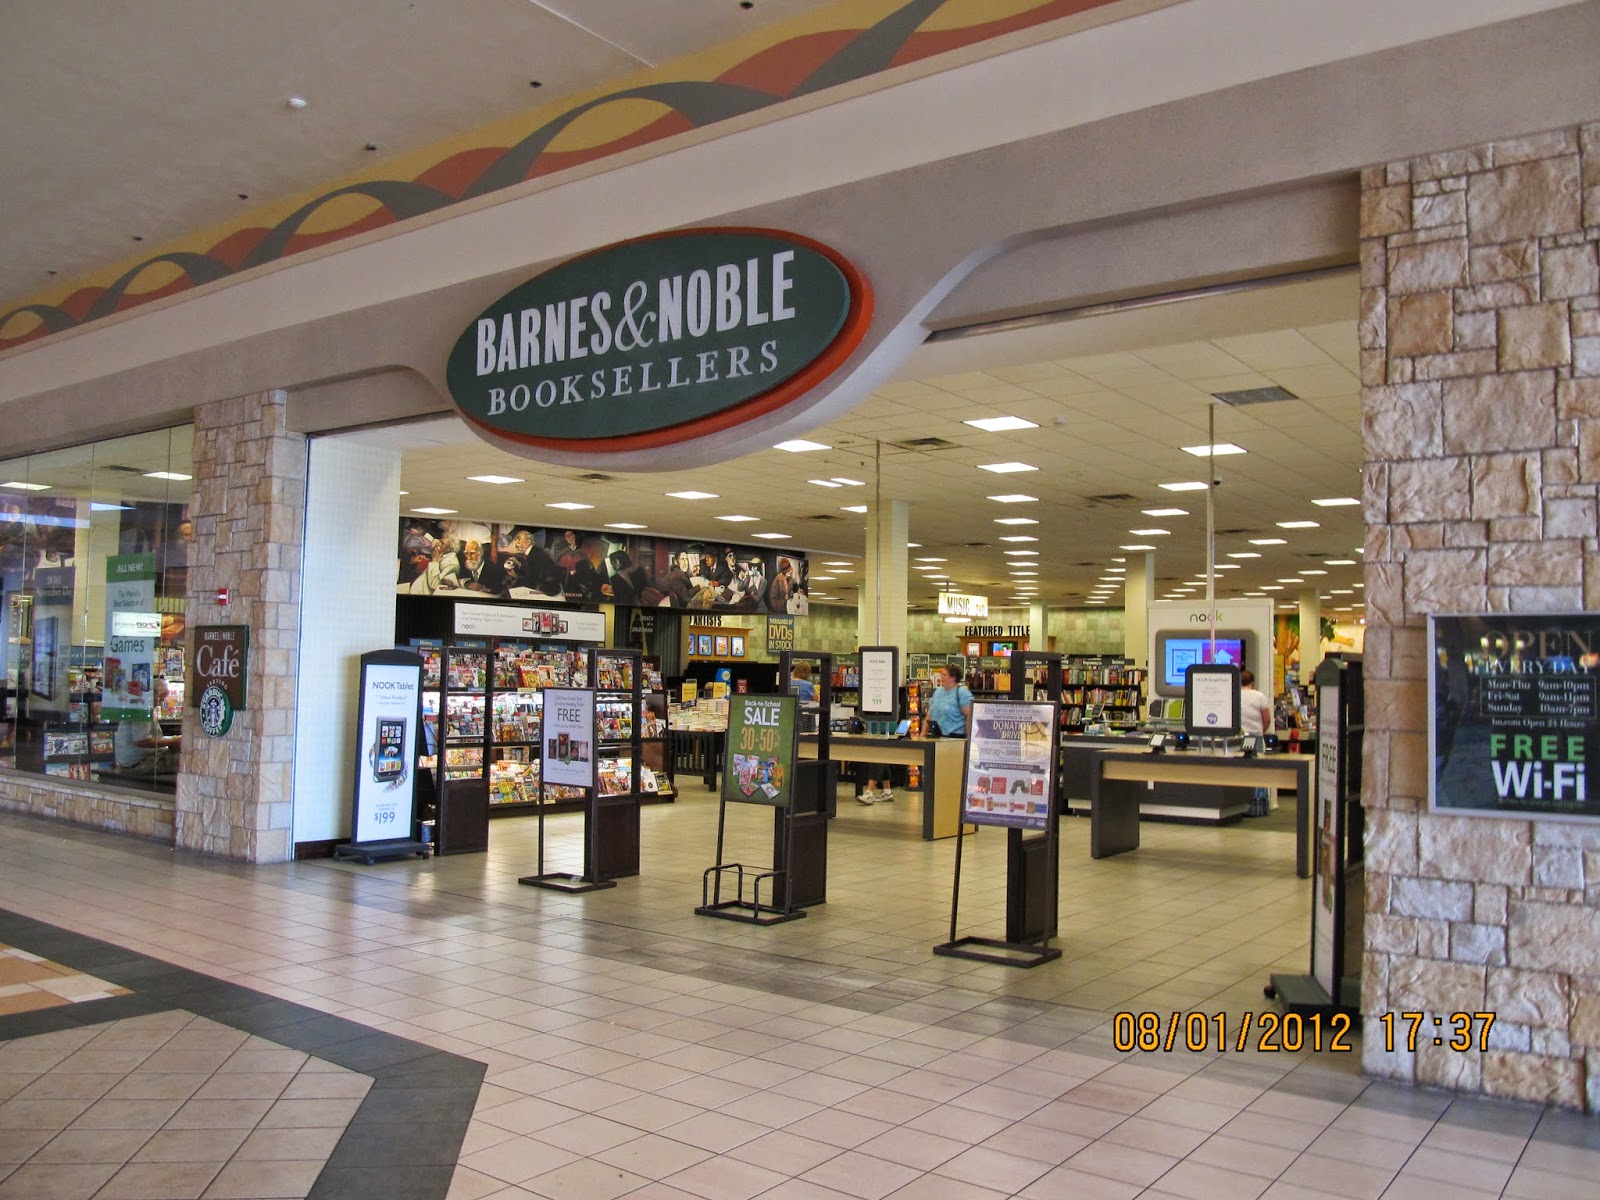 Trip to the Mall: East Towne Mall- (Madison, WI)